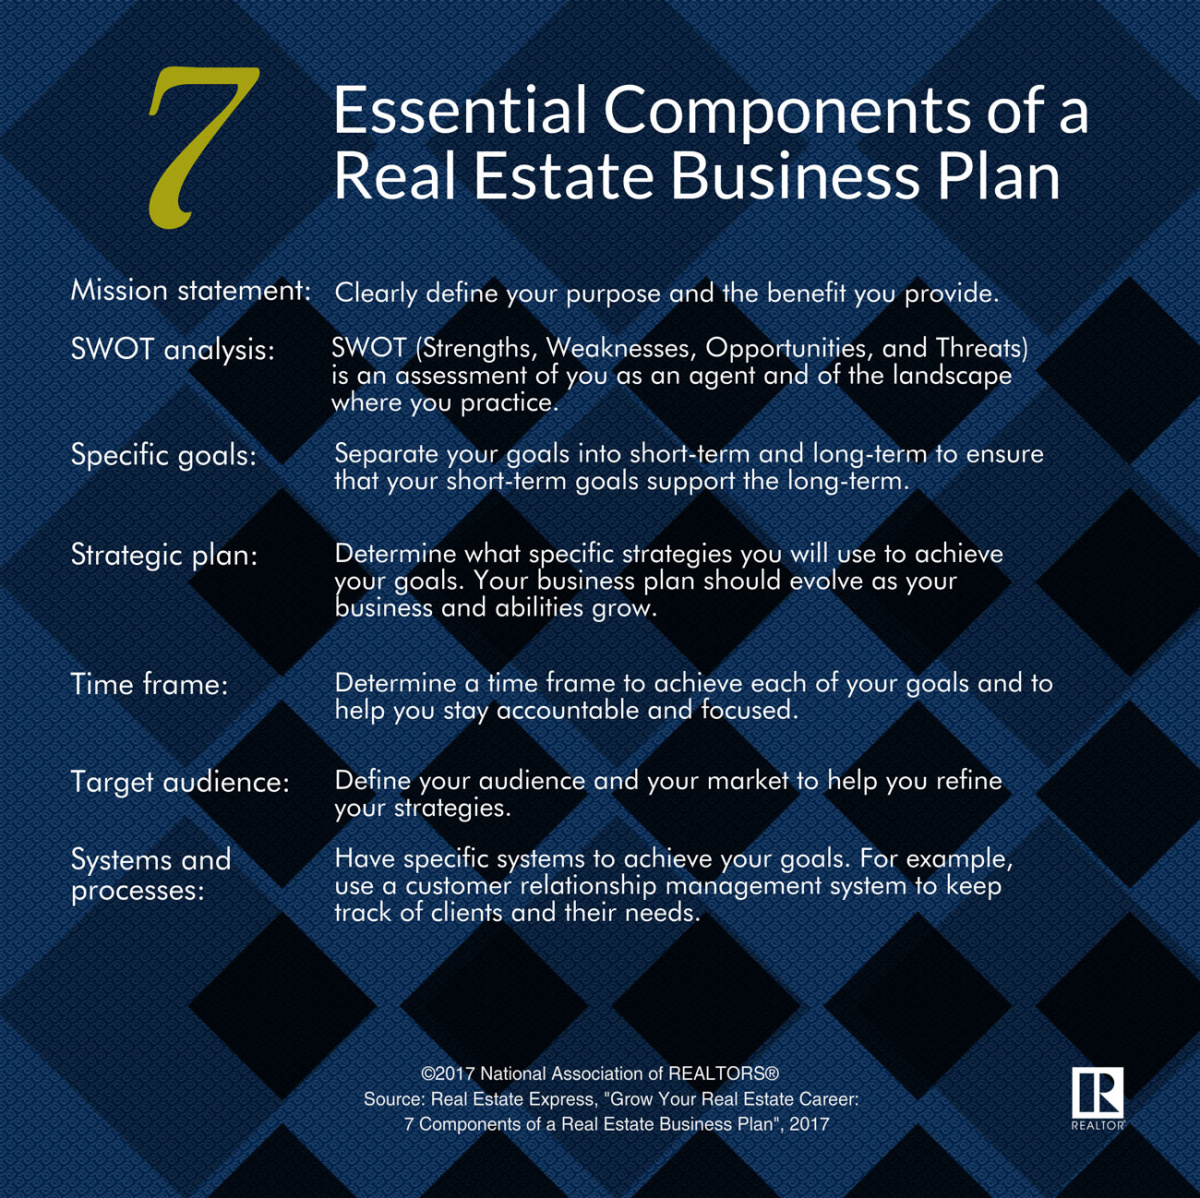 one page business plan for real estate agents